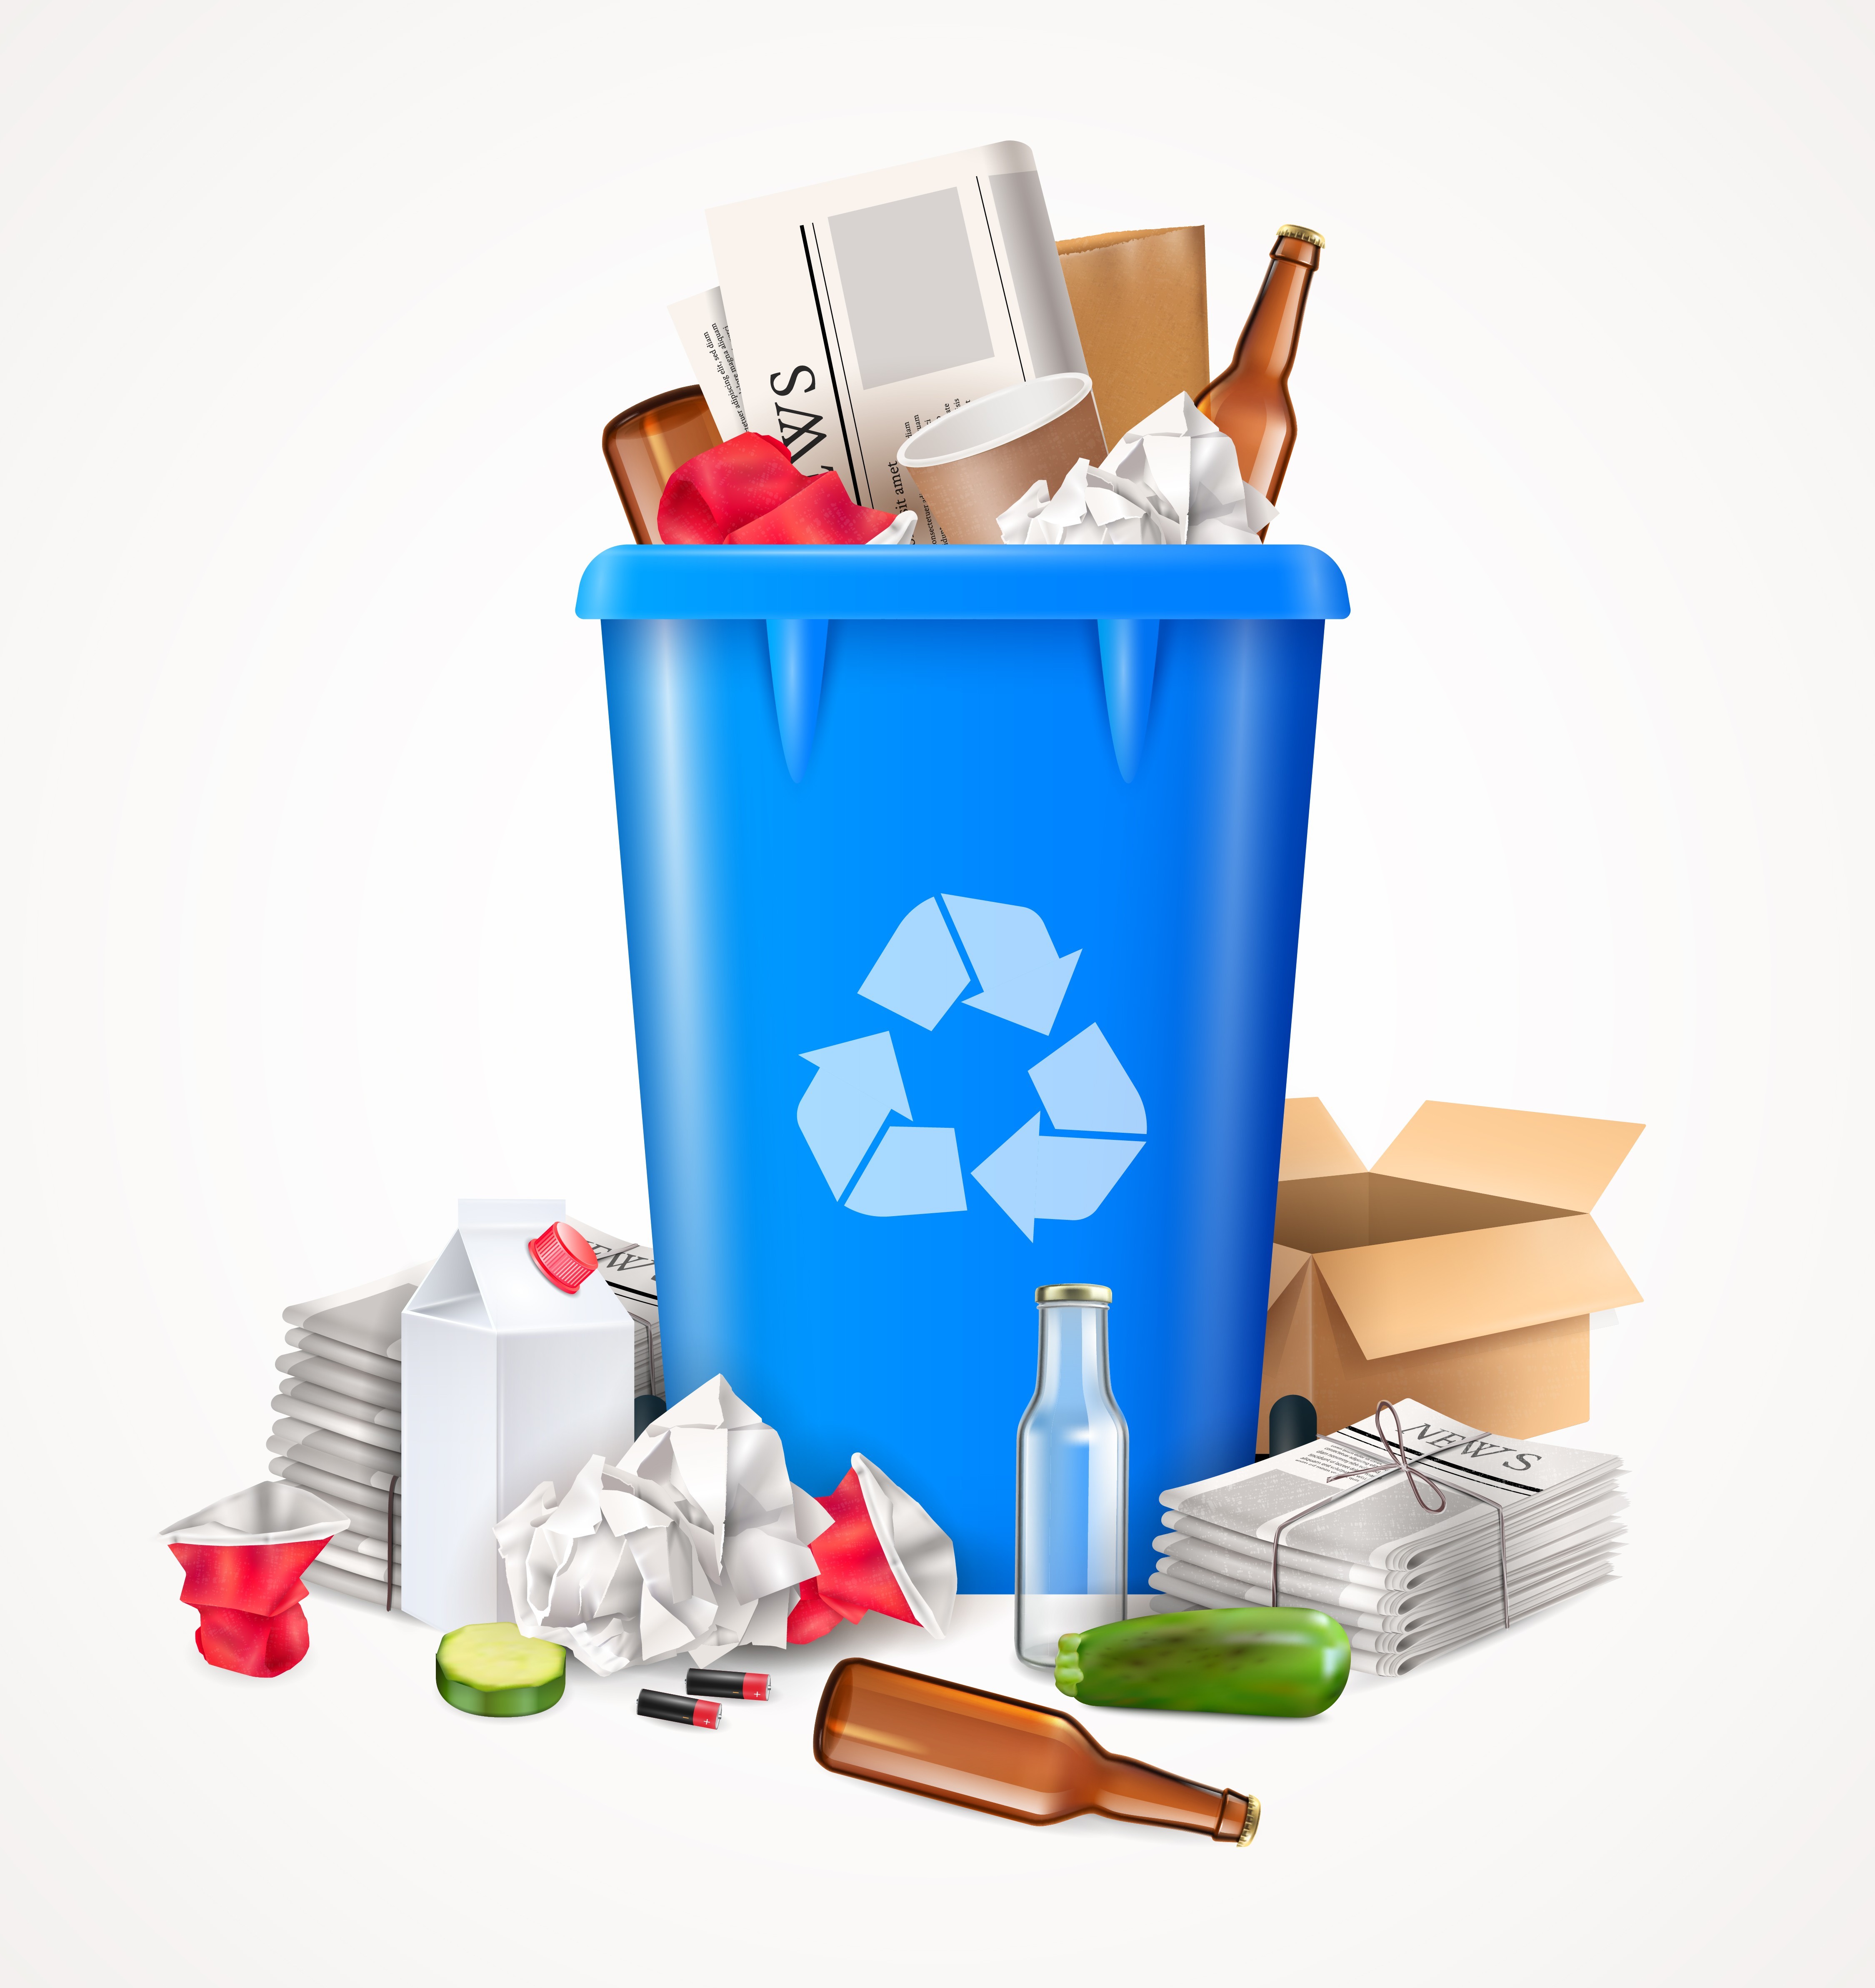 A research was conducted to identify specific consumption patterns and trends in waste generation